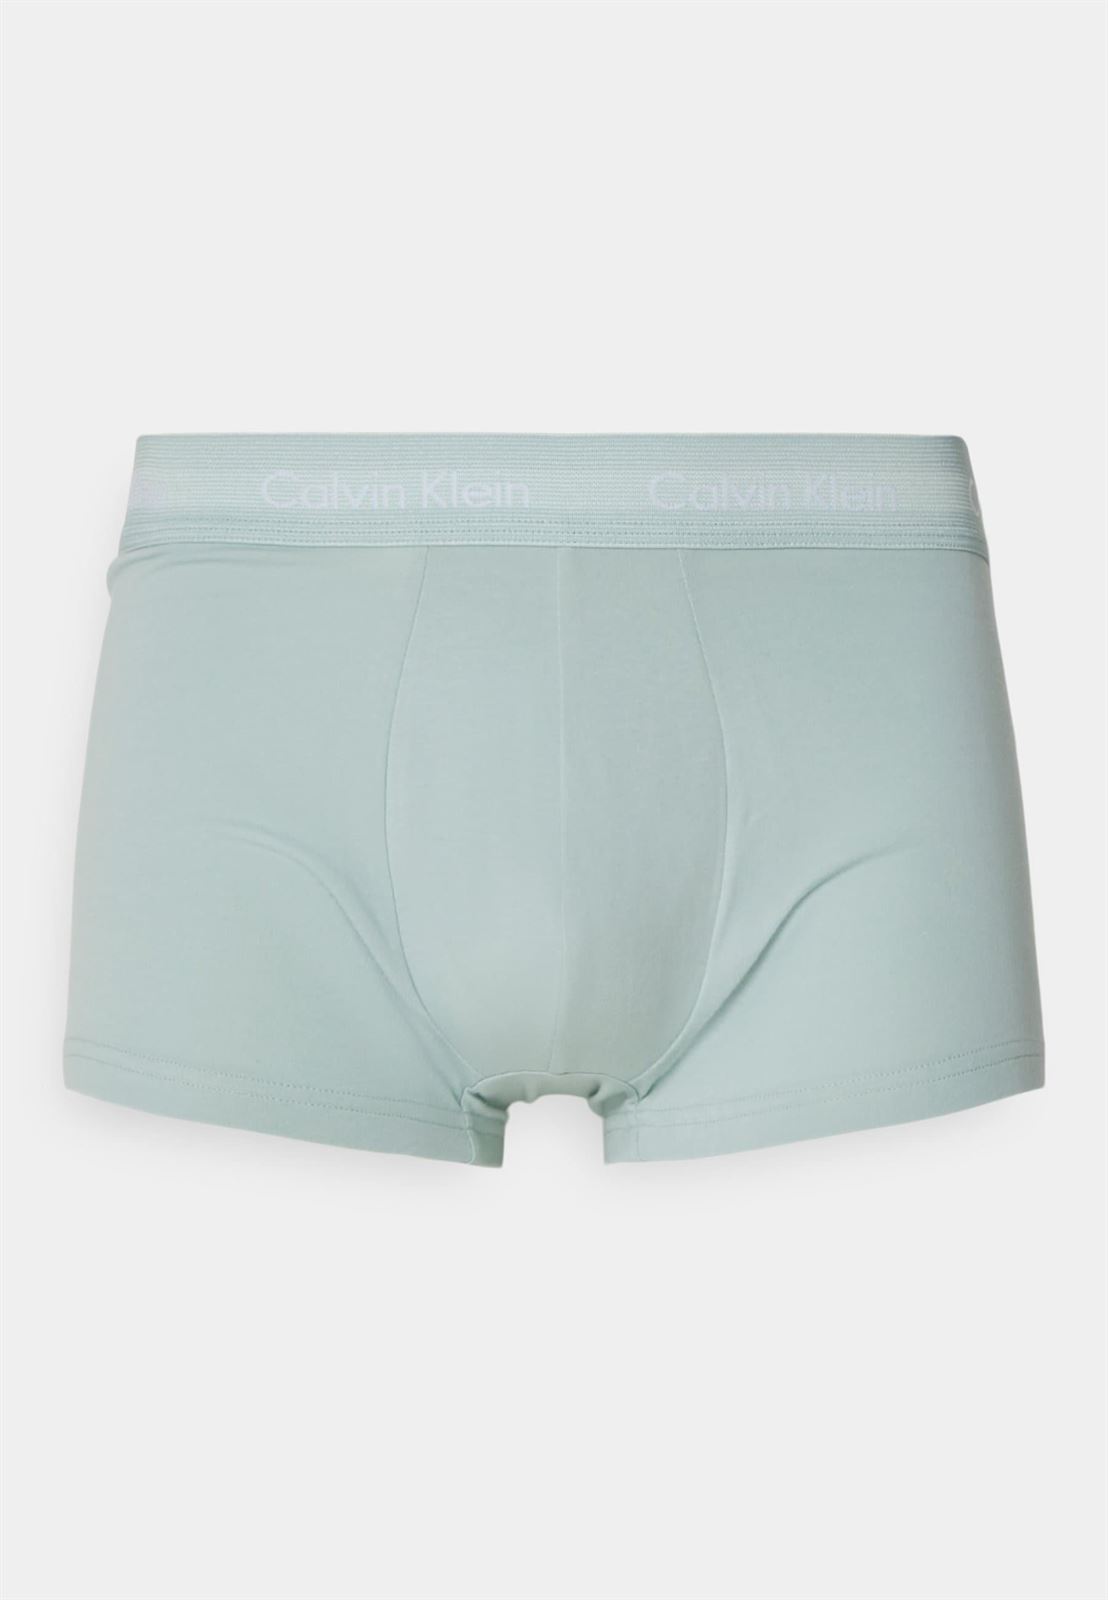 Pack 3 boxer Calvin Klein 0000U2664G H5M olv branch, charcoal gry, gry mist - Imagen 2